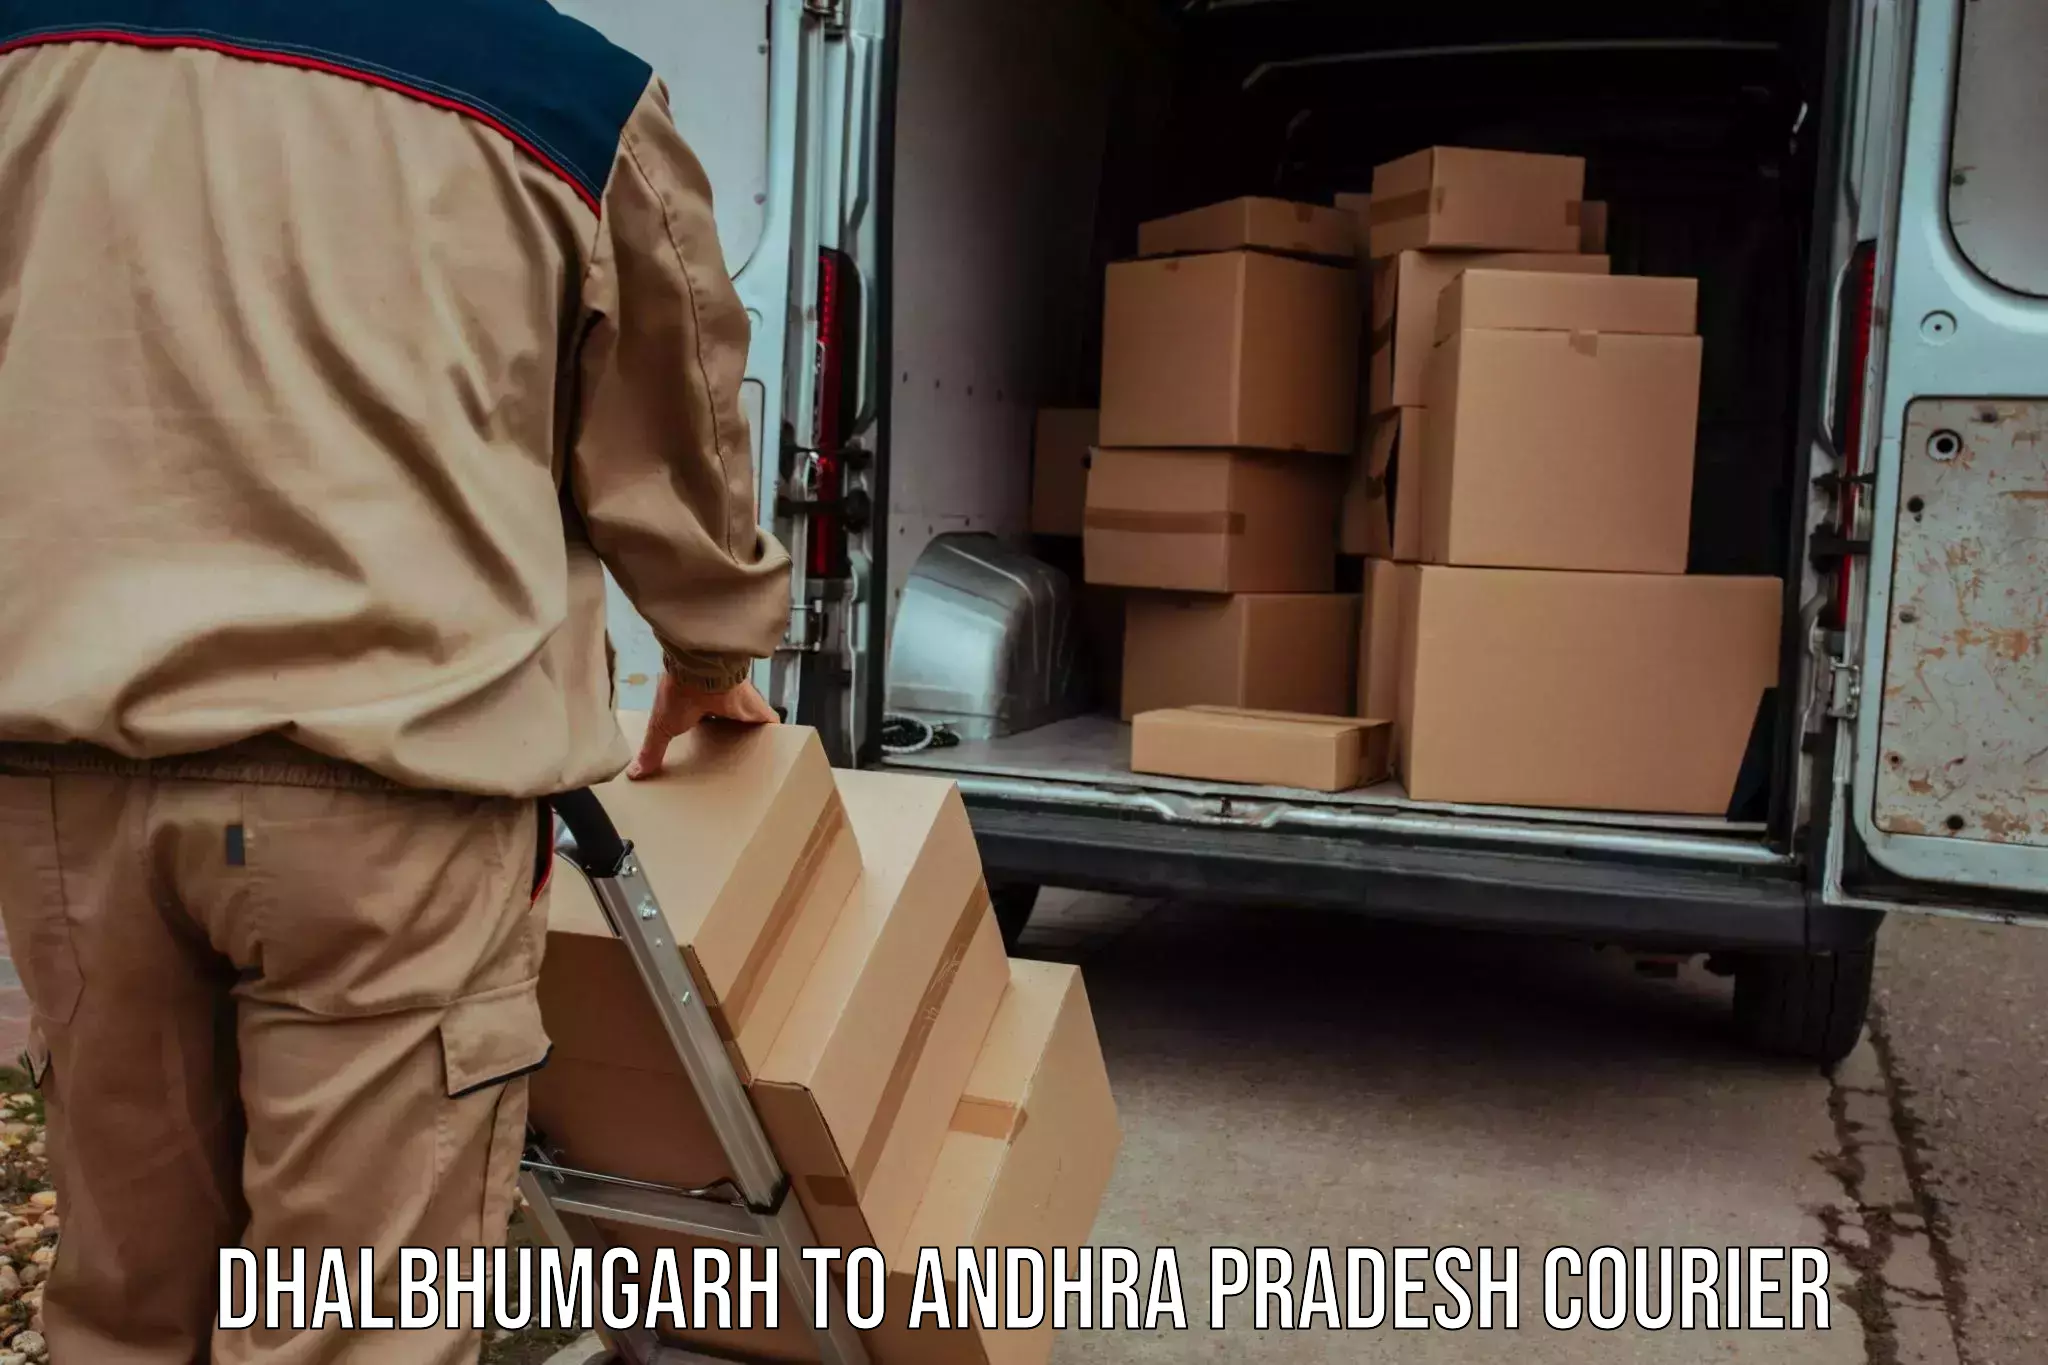 State-of-the-art courier technology Dhalbhumgarh to Podalakur